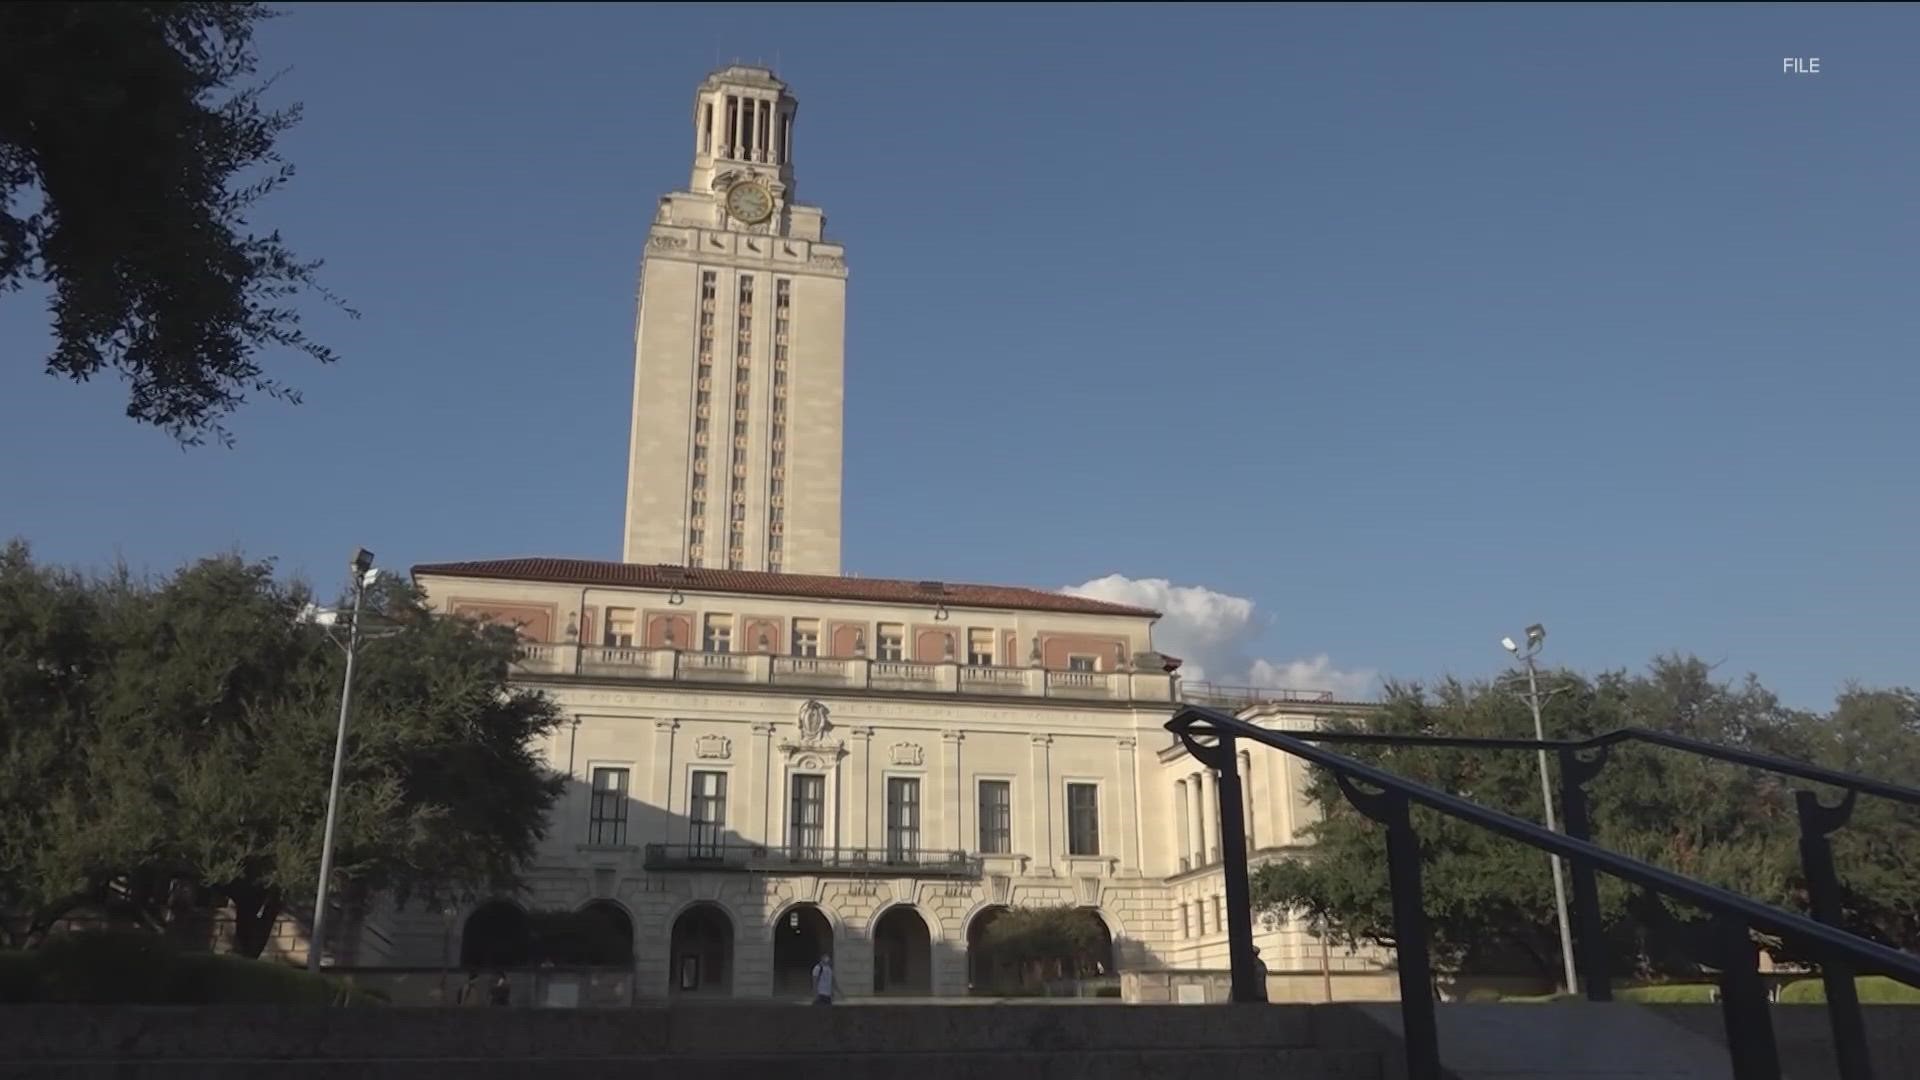 A student referendum vote on whether the alma mater should remain "The Eyes of Texas" has been delayed.